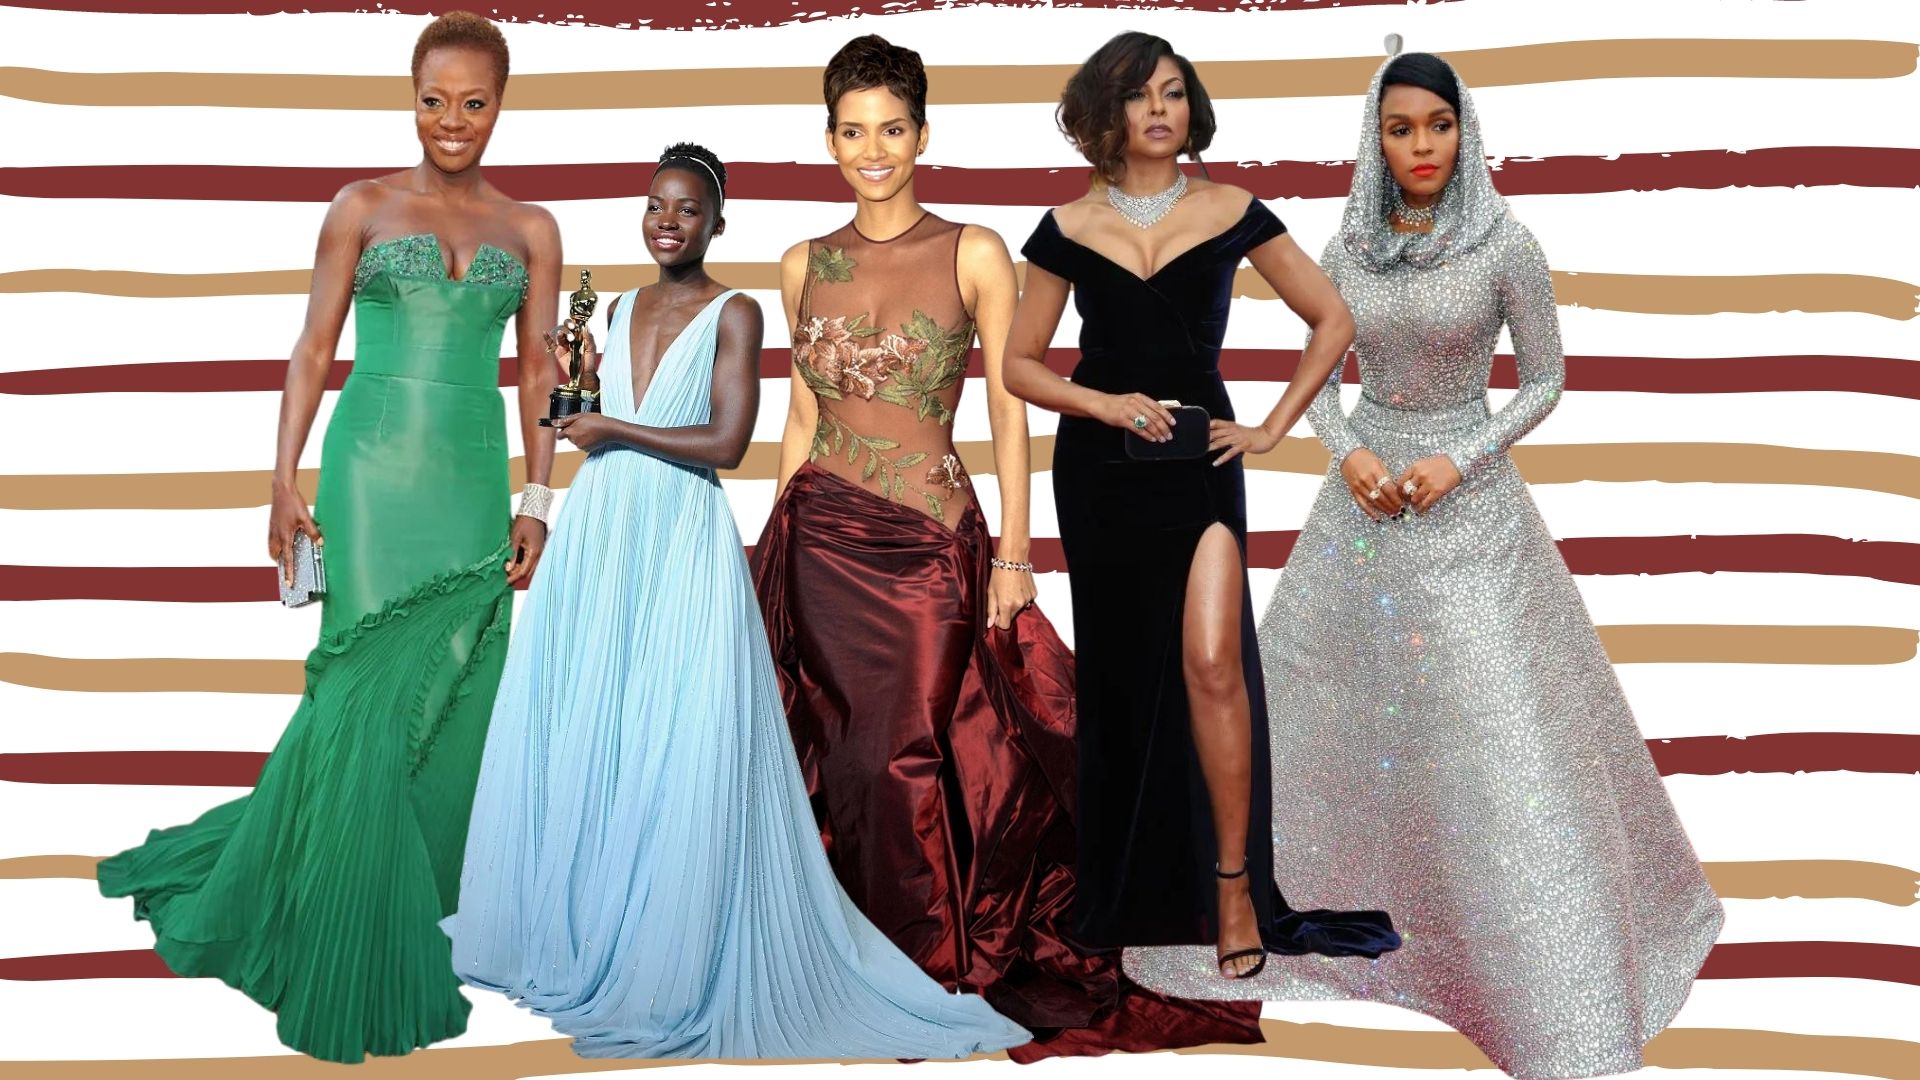 The 10 Best Oscar Dresses Of All Time - FASHION Magazine